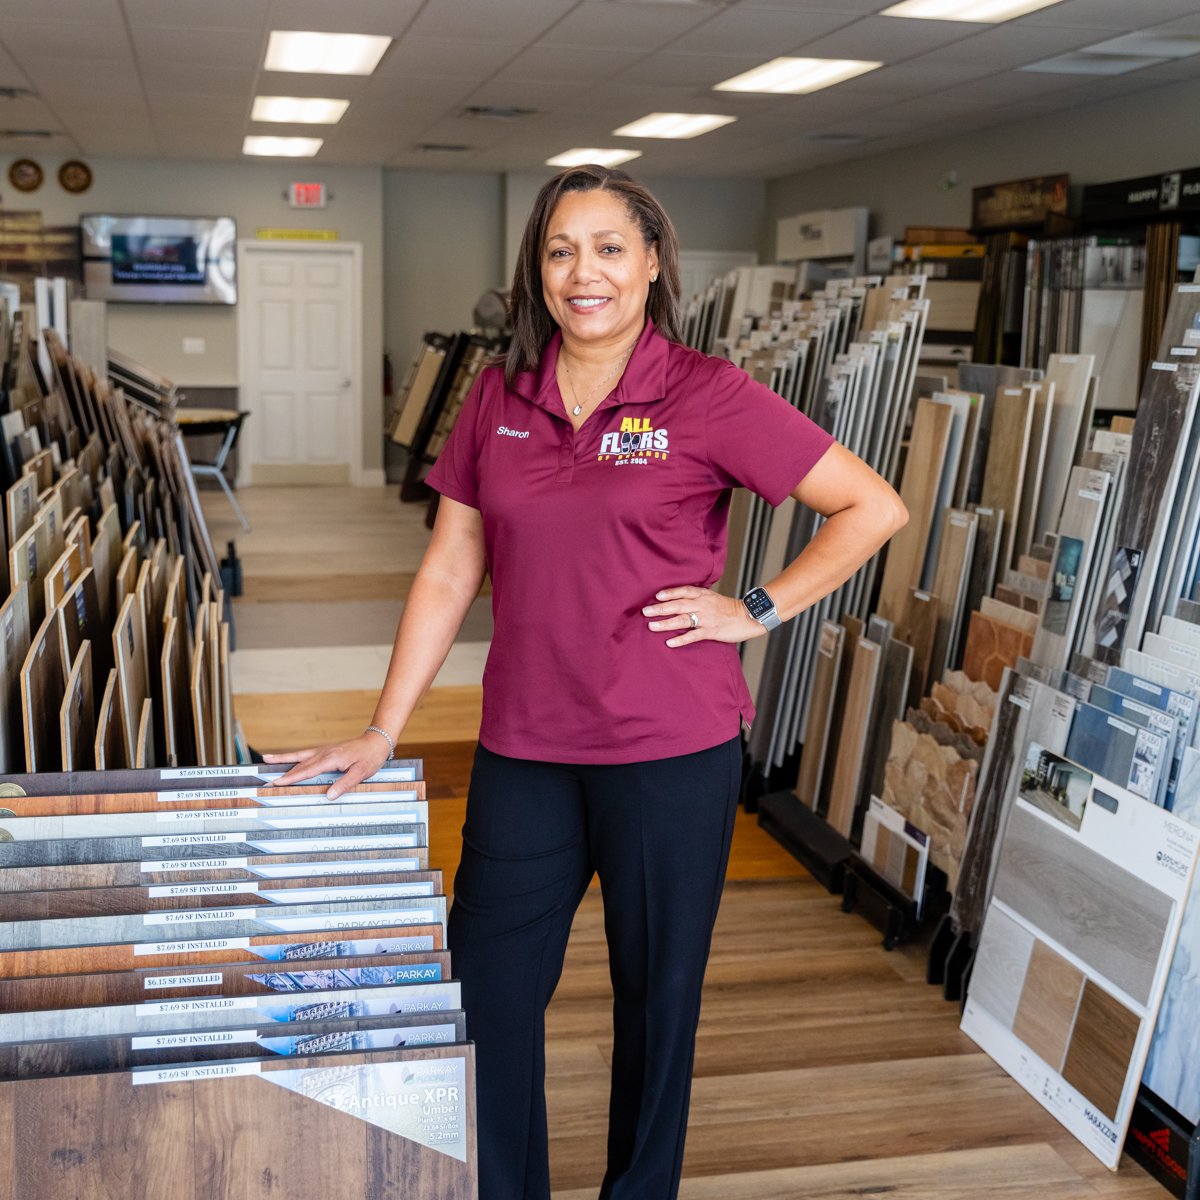 By treating all our customers like family, we've earned a great reputation for being the go-to team for quality flooring services in Orlando.  #AllFloorsOfOrlando #OrlandoFlooring #FlooringInstallation #HardwoodFloors #FlooringProducts #carpet #FlooringOrlando #OrlandoFloors